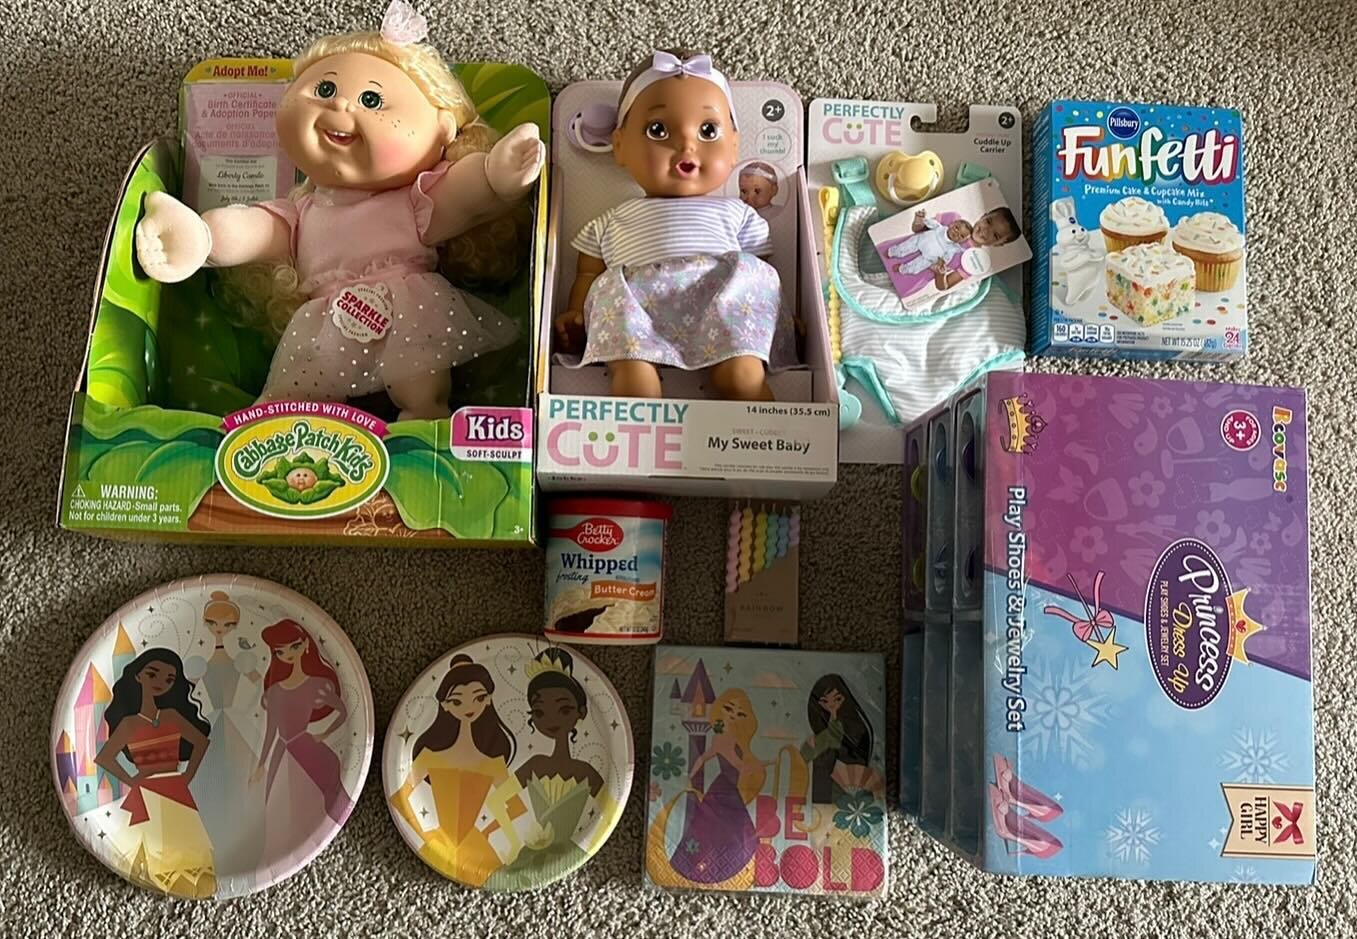 &ldquo;The cost of living is impacting us and we can never get ahead with bills. I am a stay at home mom as we have 2 kids with special needs. I can&rsquo;t work right now due to both kids therapy requirements.&rdquo;

This newest Birthday Kit is for